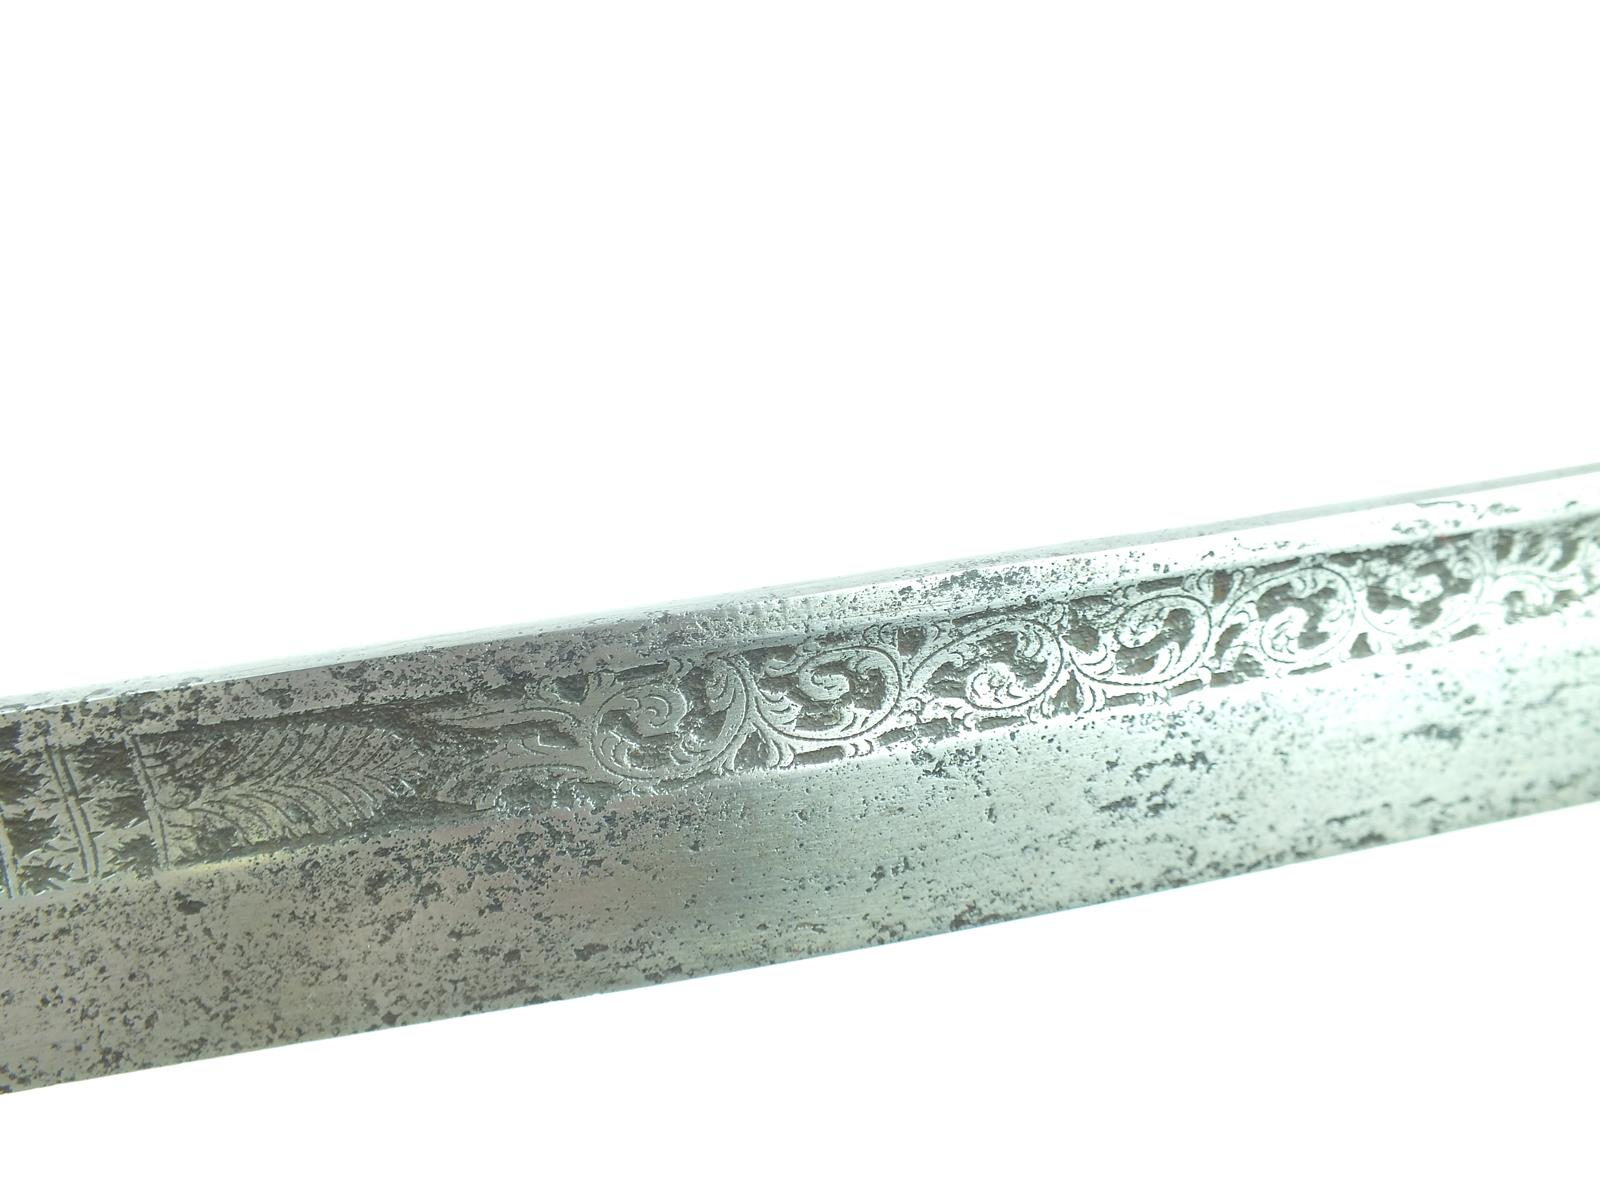 A 19th Century Dutch East Indies Hunting Hanger with Klewang Blade, 57.5cm blade decorated with - Image 7 of 8